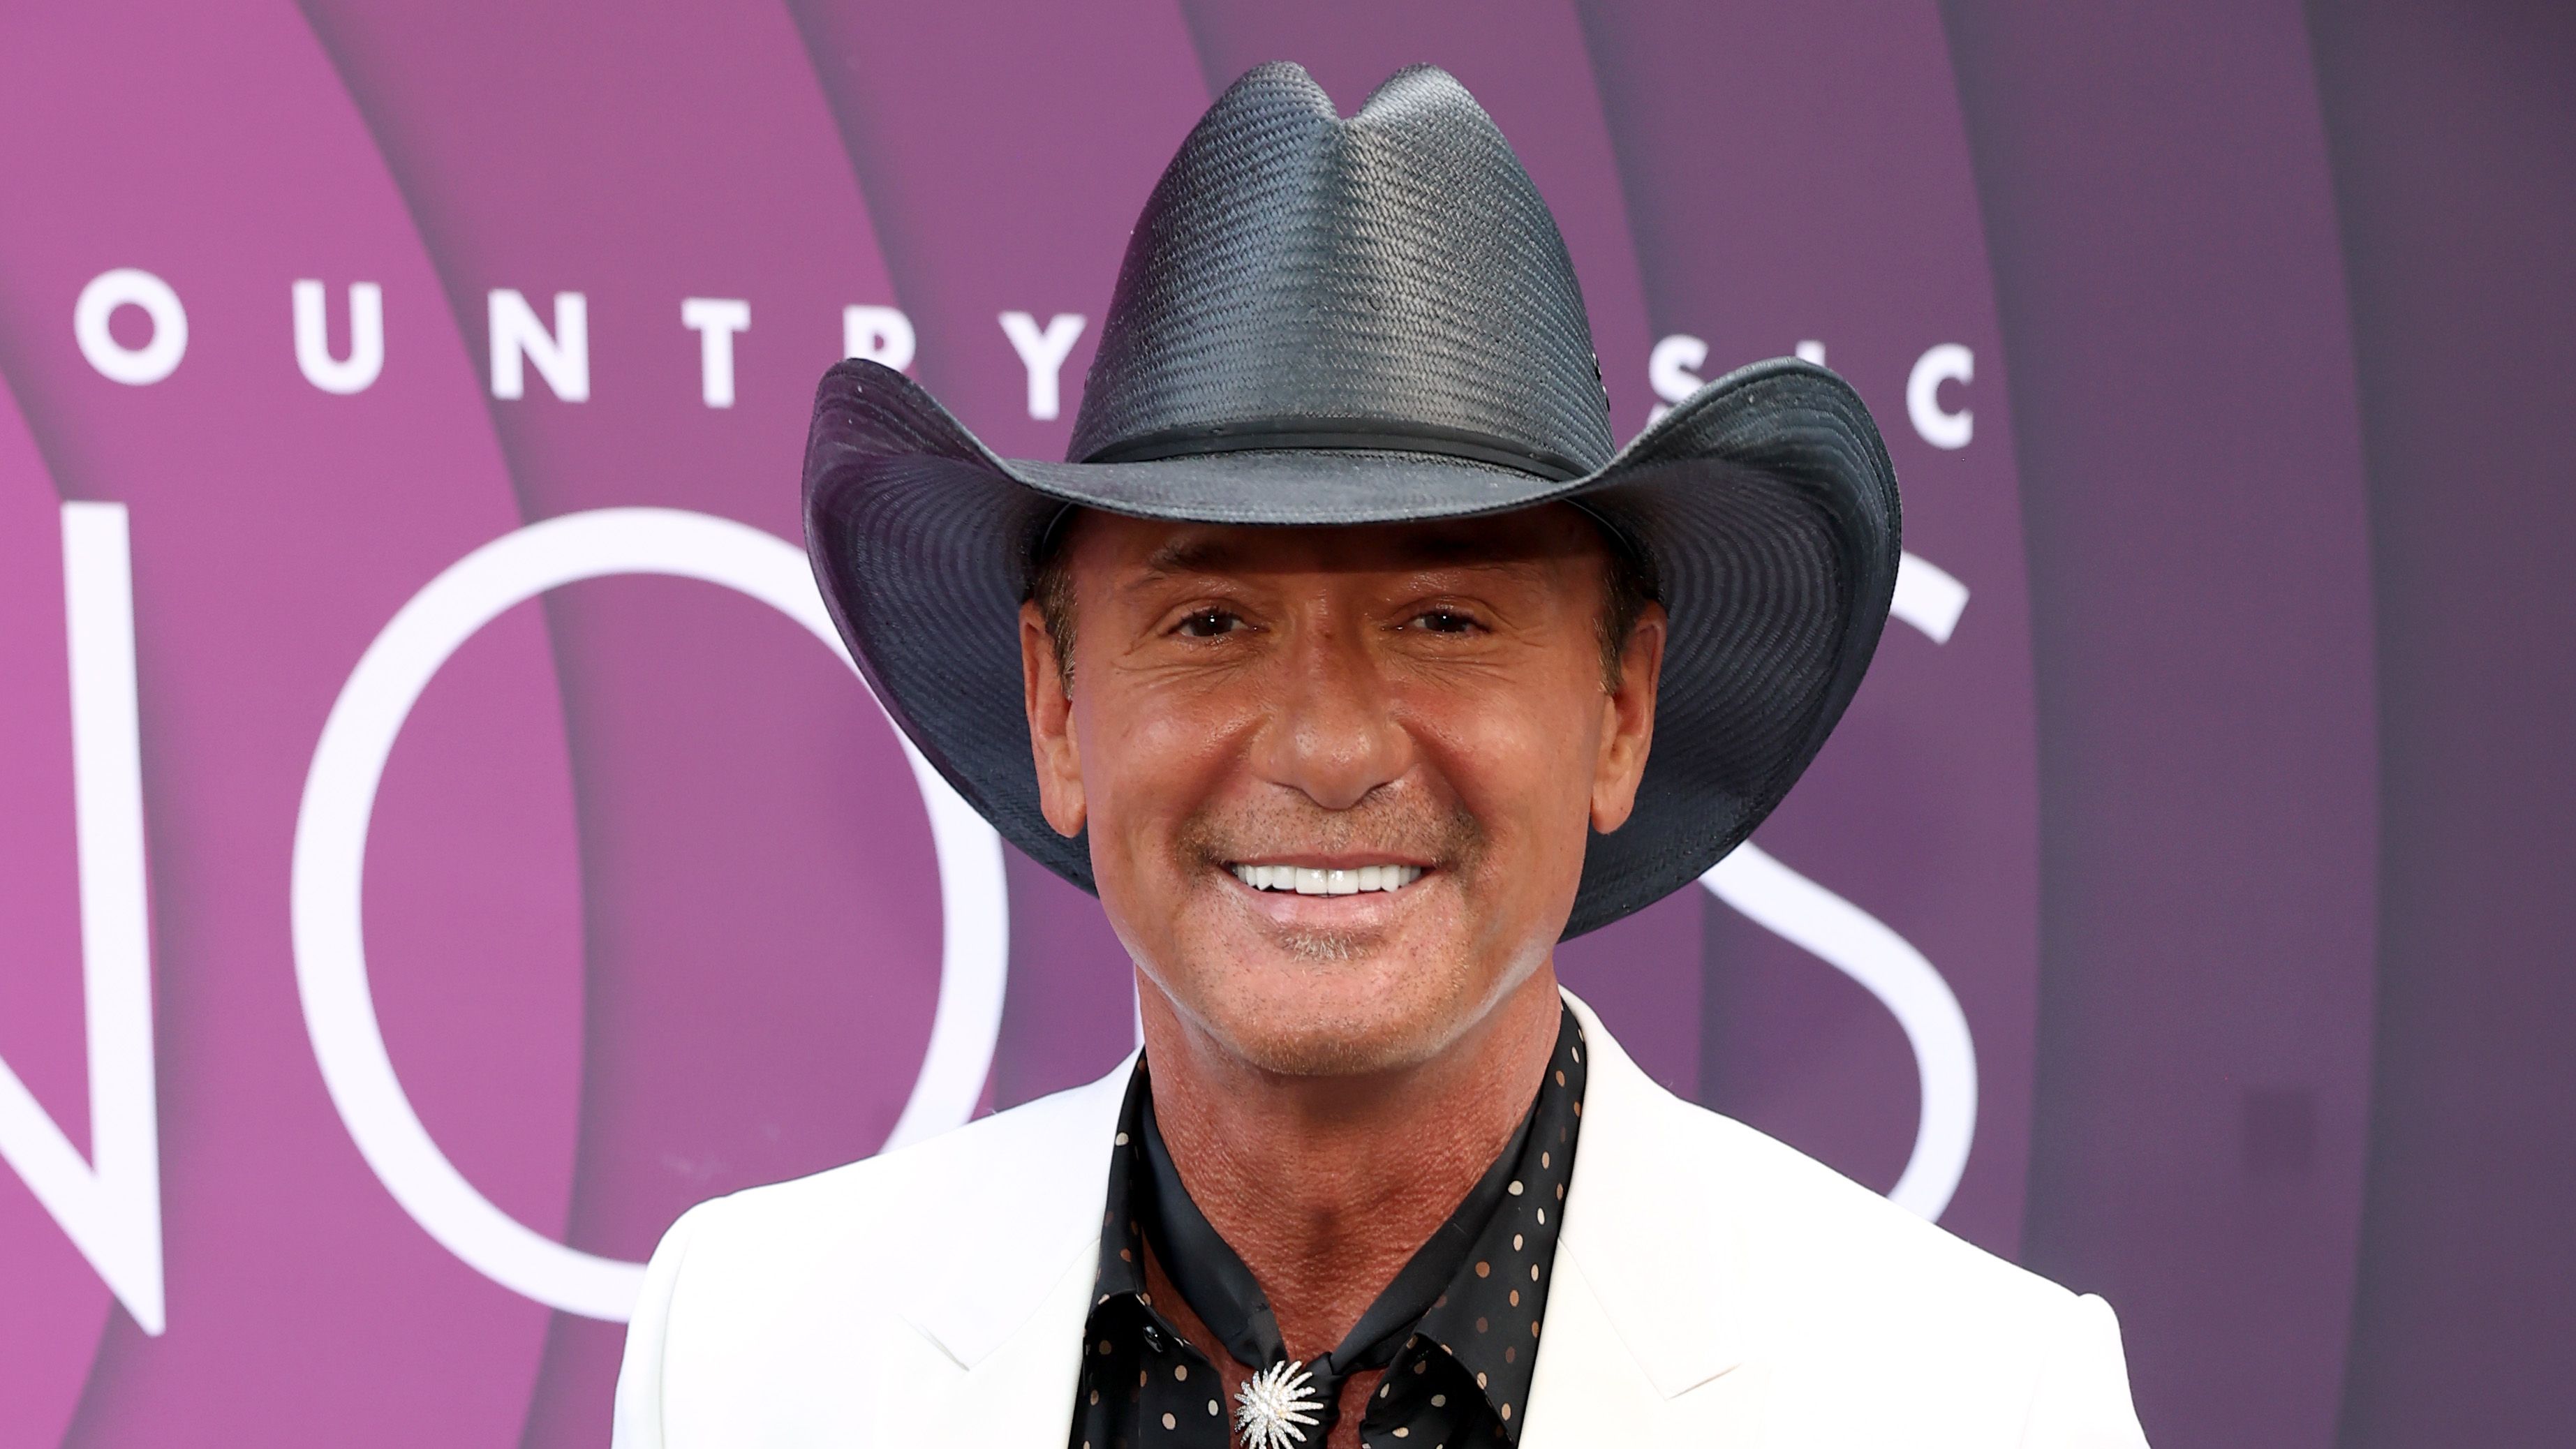 Tim McGraw Shares Behind-the-Scenes Instagram of His Family Ahead